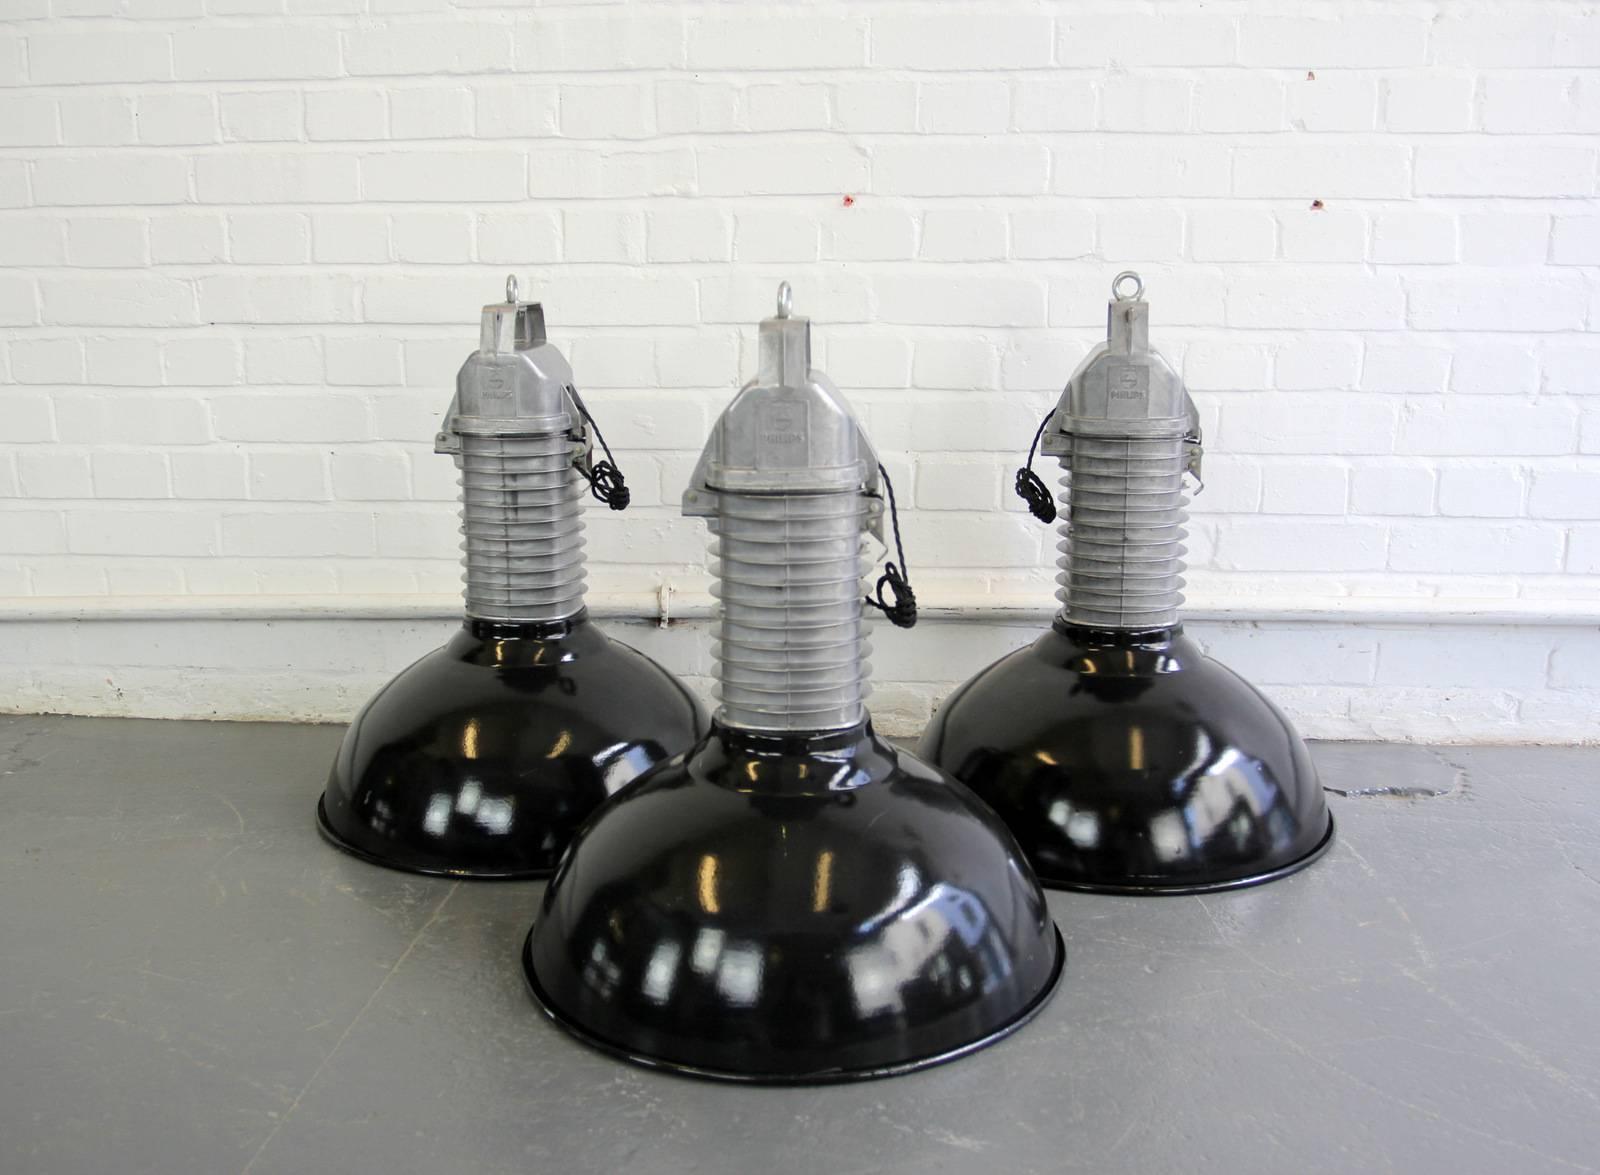 Large industrial pendant lights by Phillips, circa 1950s.

Product code #OA527

- Price is per light (3 available)
- Vitreous black enamel shade
- White enamel inner reflector
- Cast aluminium finned tops
- Comes with 100cm of black braided